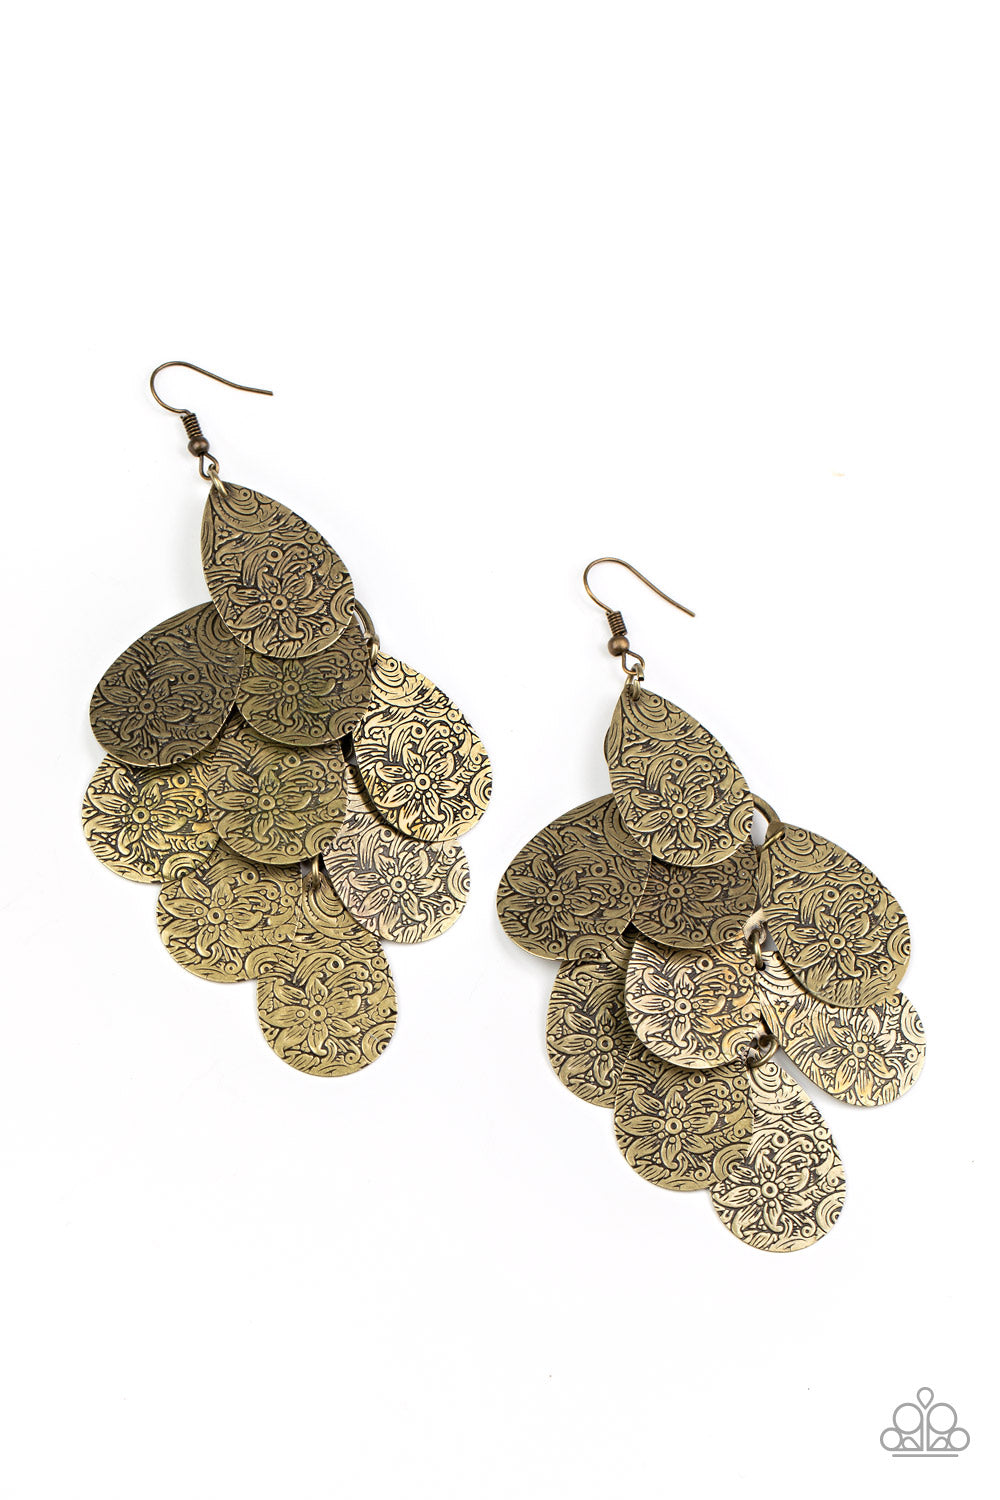 Embossed in a tropical floral pattern, antiqued brass teardrops cascade from the ear, coalescing into a noise-making lure. Earring attaches to a standard fishhook fitting.